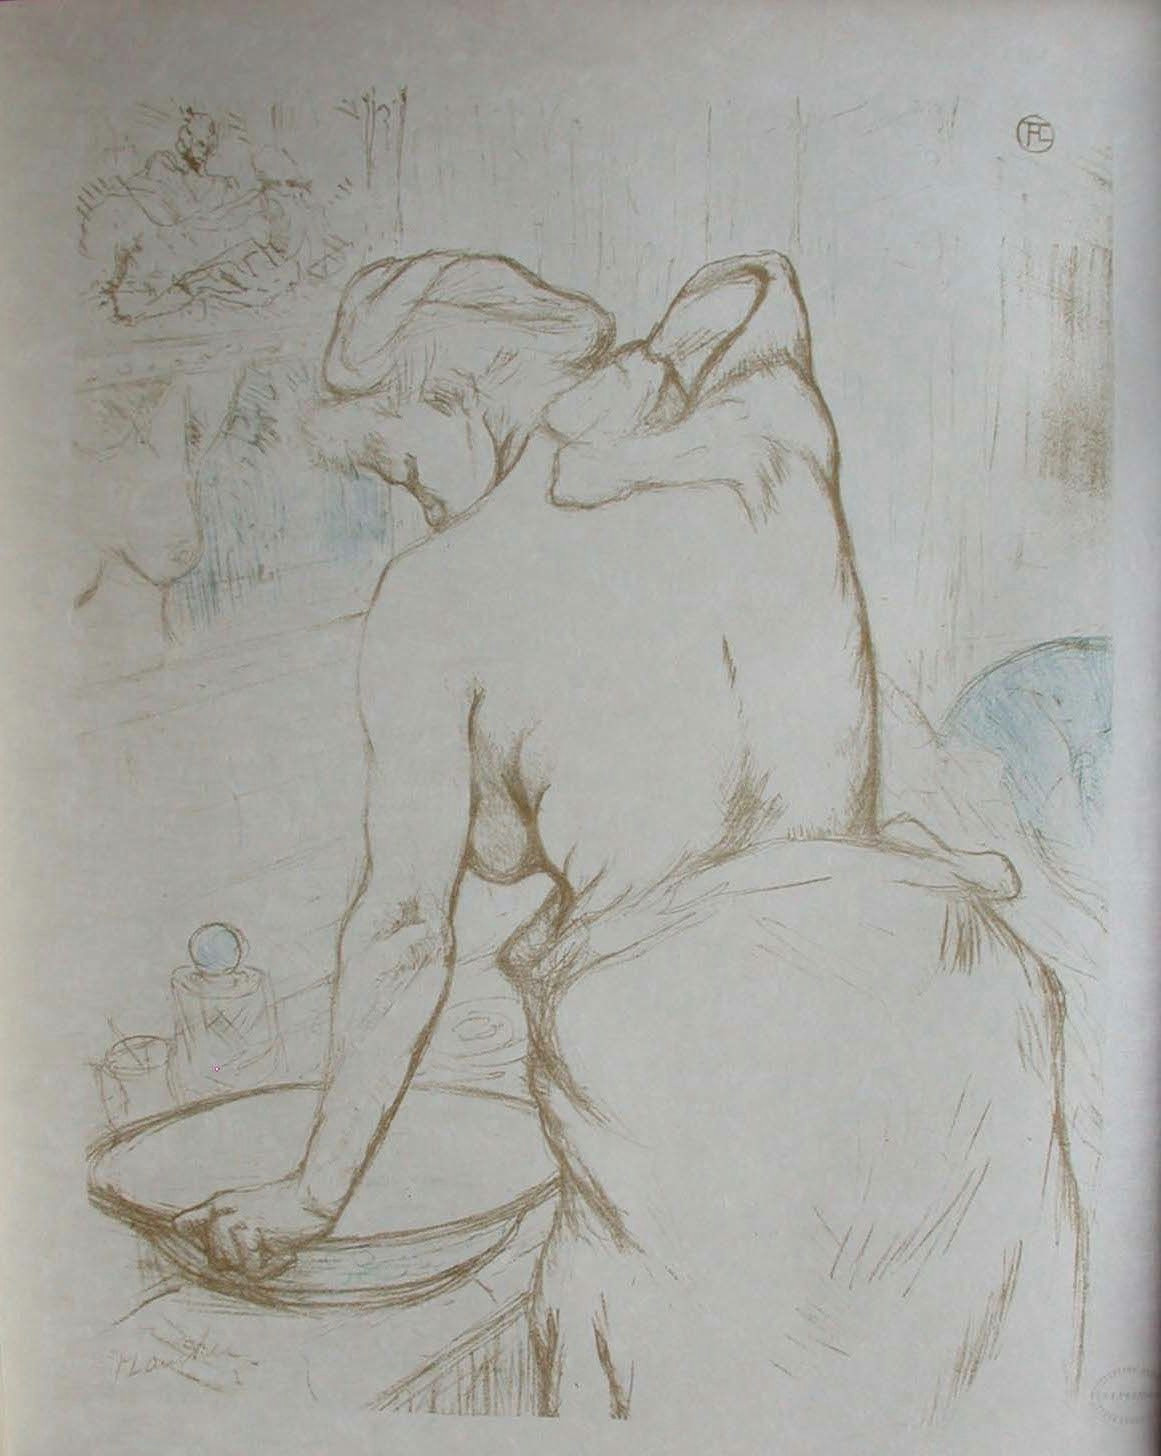 woman washing herself elles series artist henri toulouse lautrec origin france 1990 23 x 19 in 58 x 48 cm 1 out of 11 lithographs from